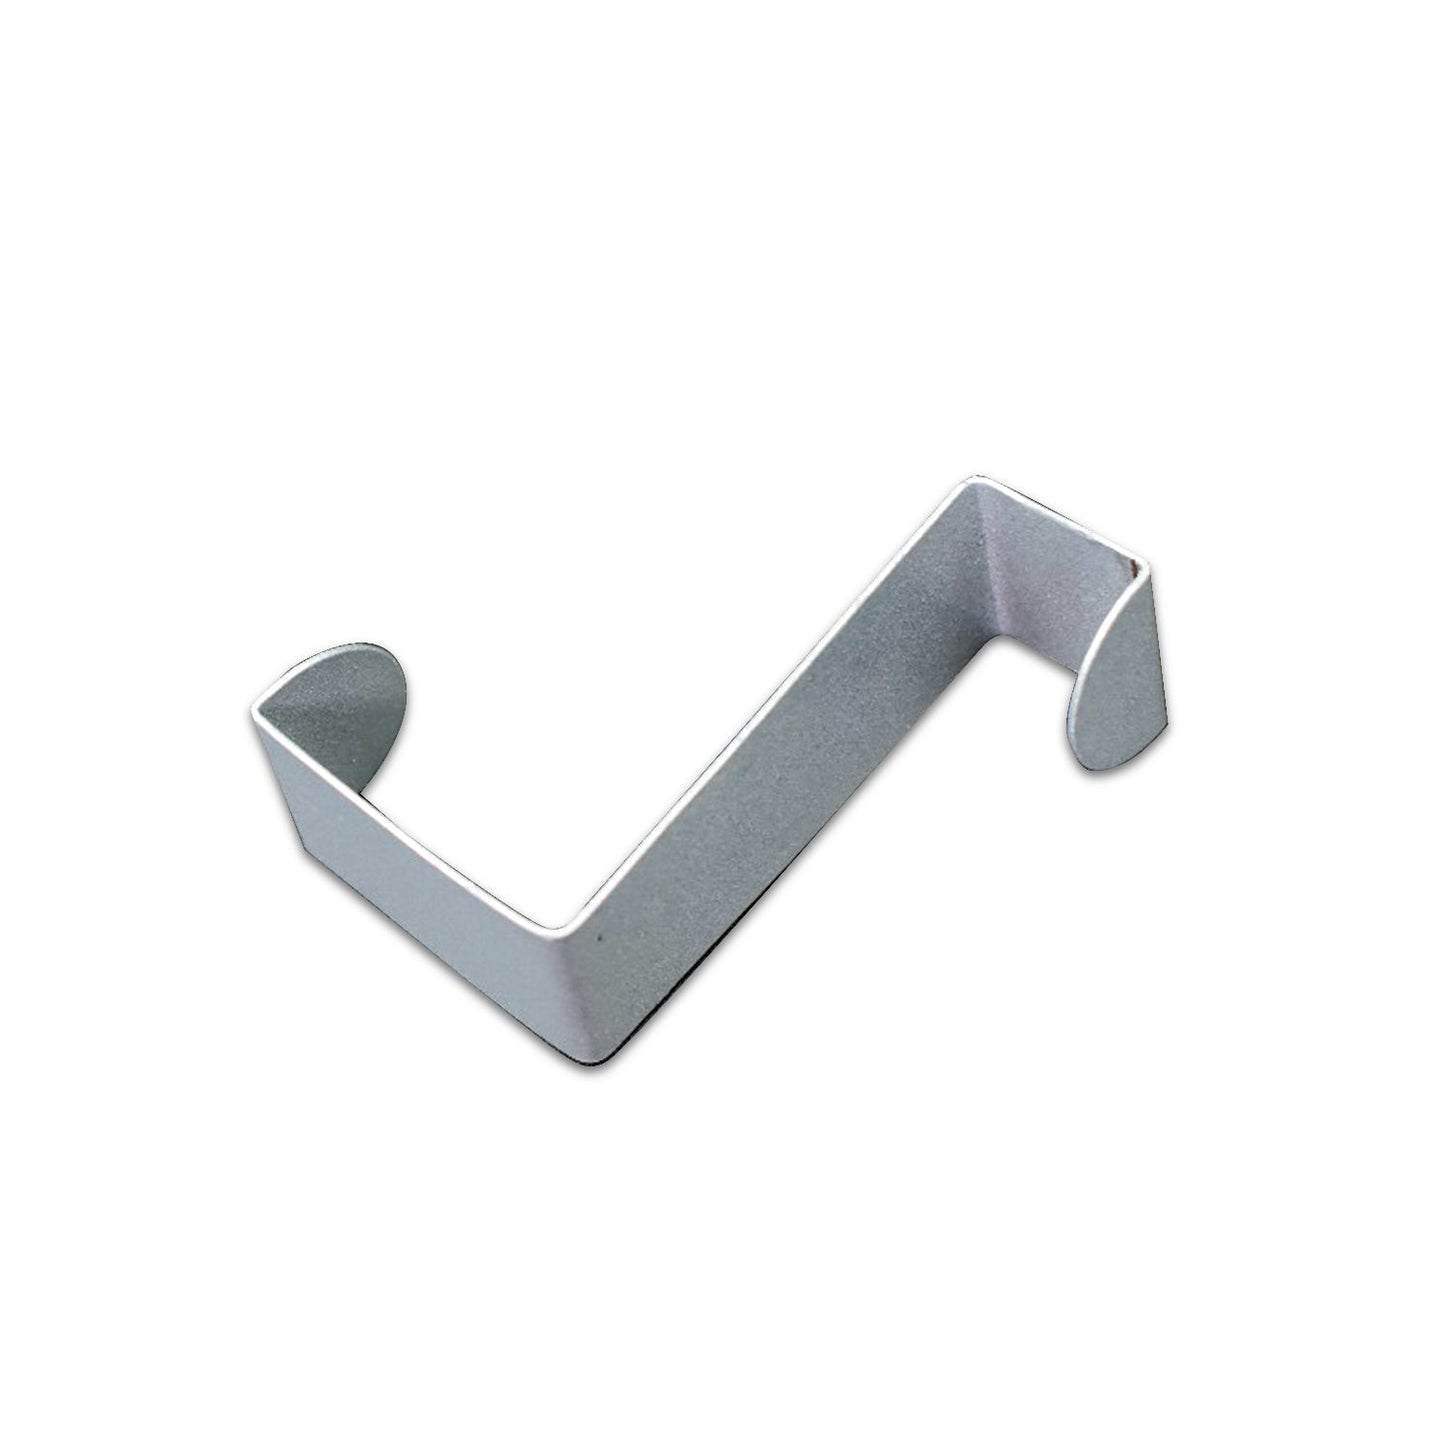 9027 1 Pc Z Shape Door Over Hook used widely in all kinds of household for hanging of cloths and fabric items etc. - SWASTIK CREATIONS The Trend Point SWASTIK CREATIONS The Trend Point